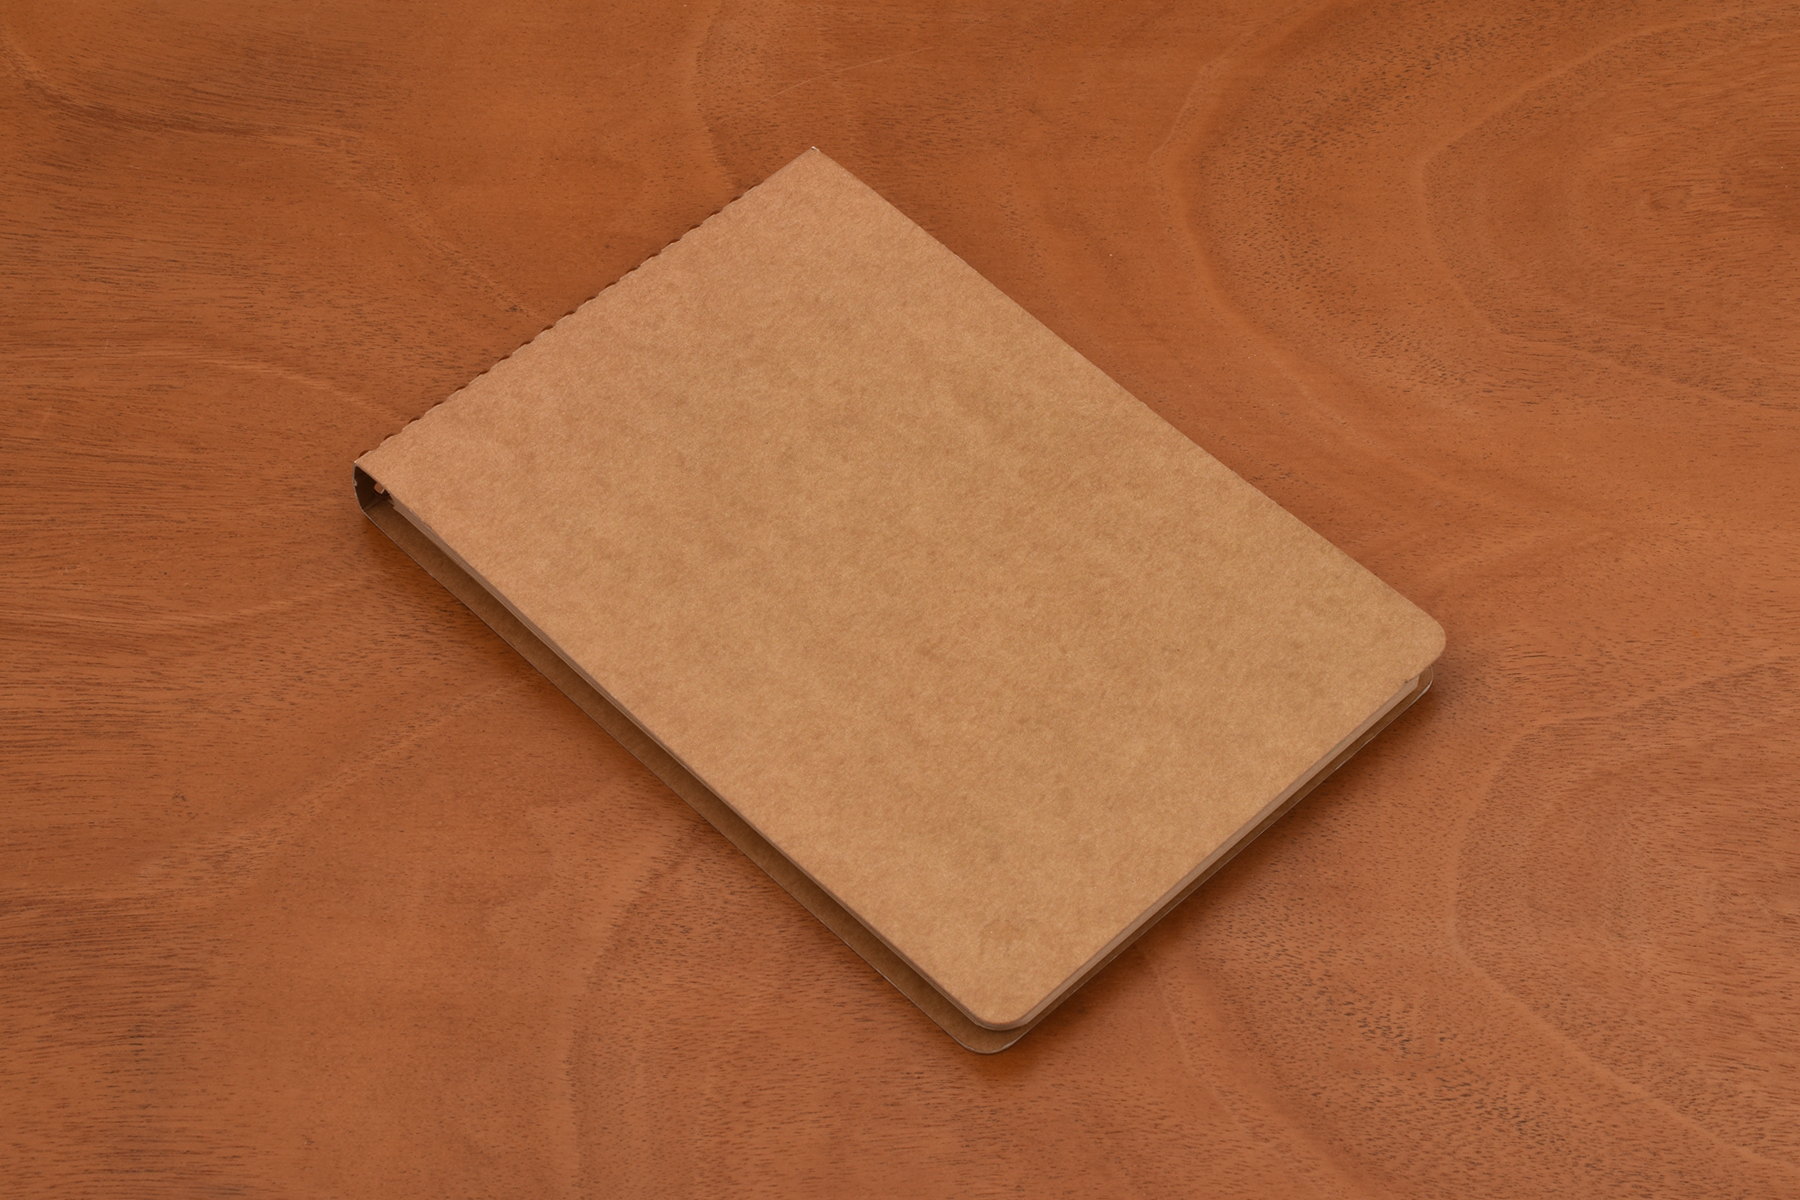 You can sketch and journal on the kraft paper pages of the TRAVELER'S COMPANY SPIRAL RING NOTEBOOK.